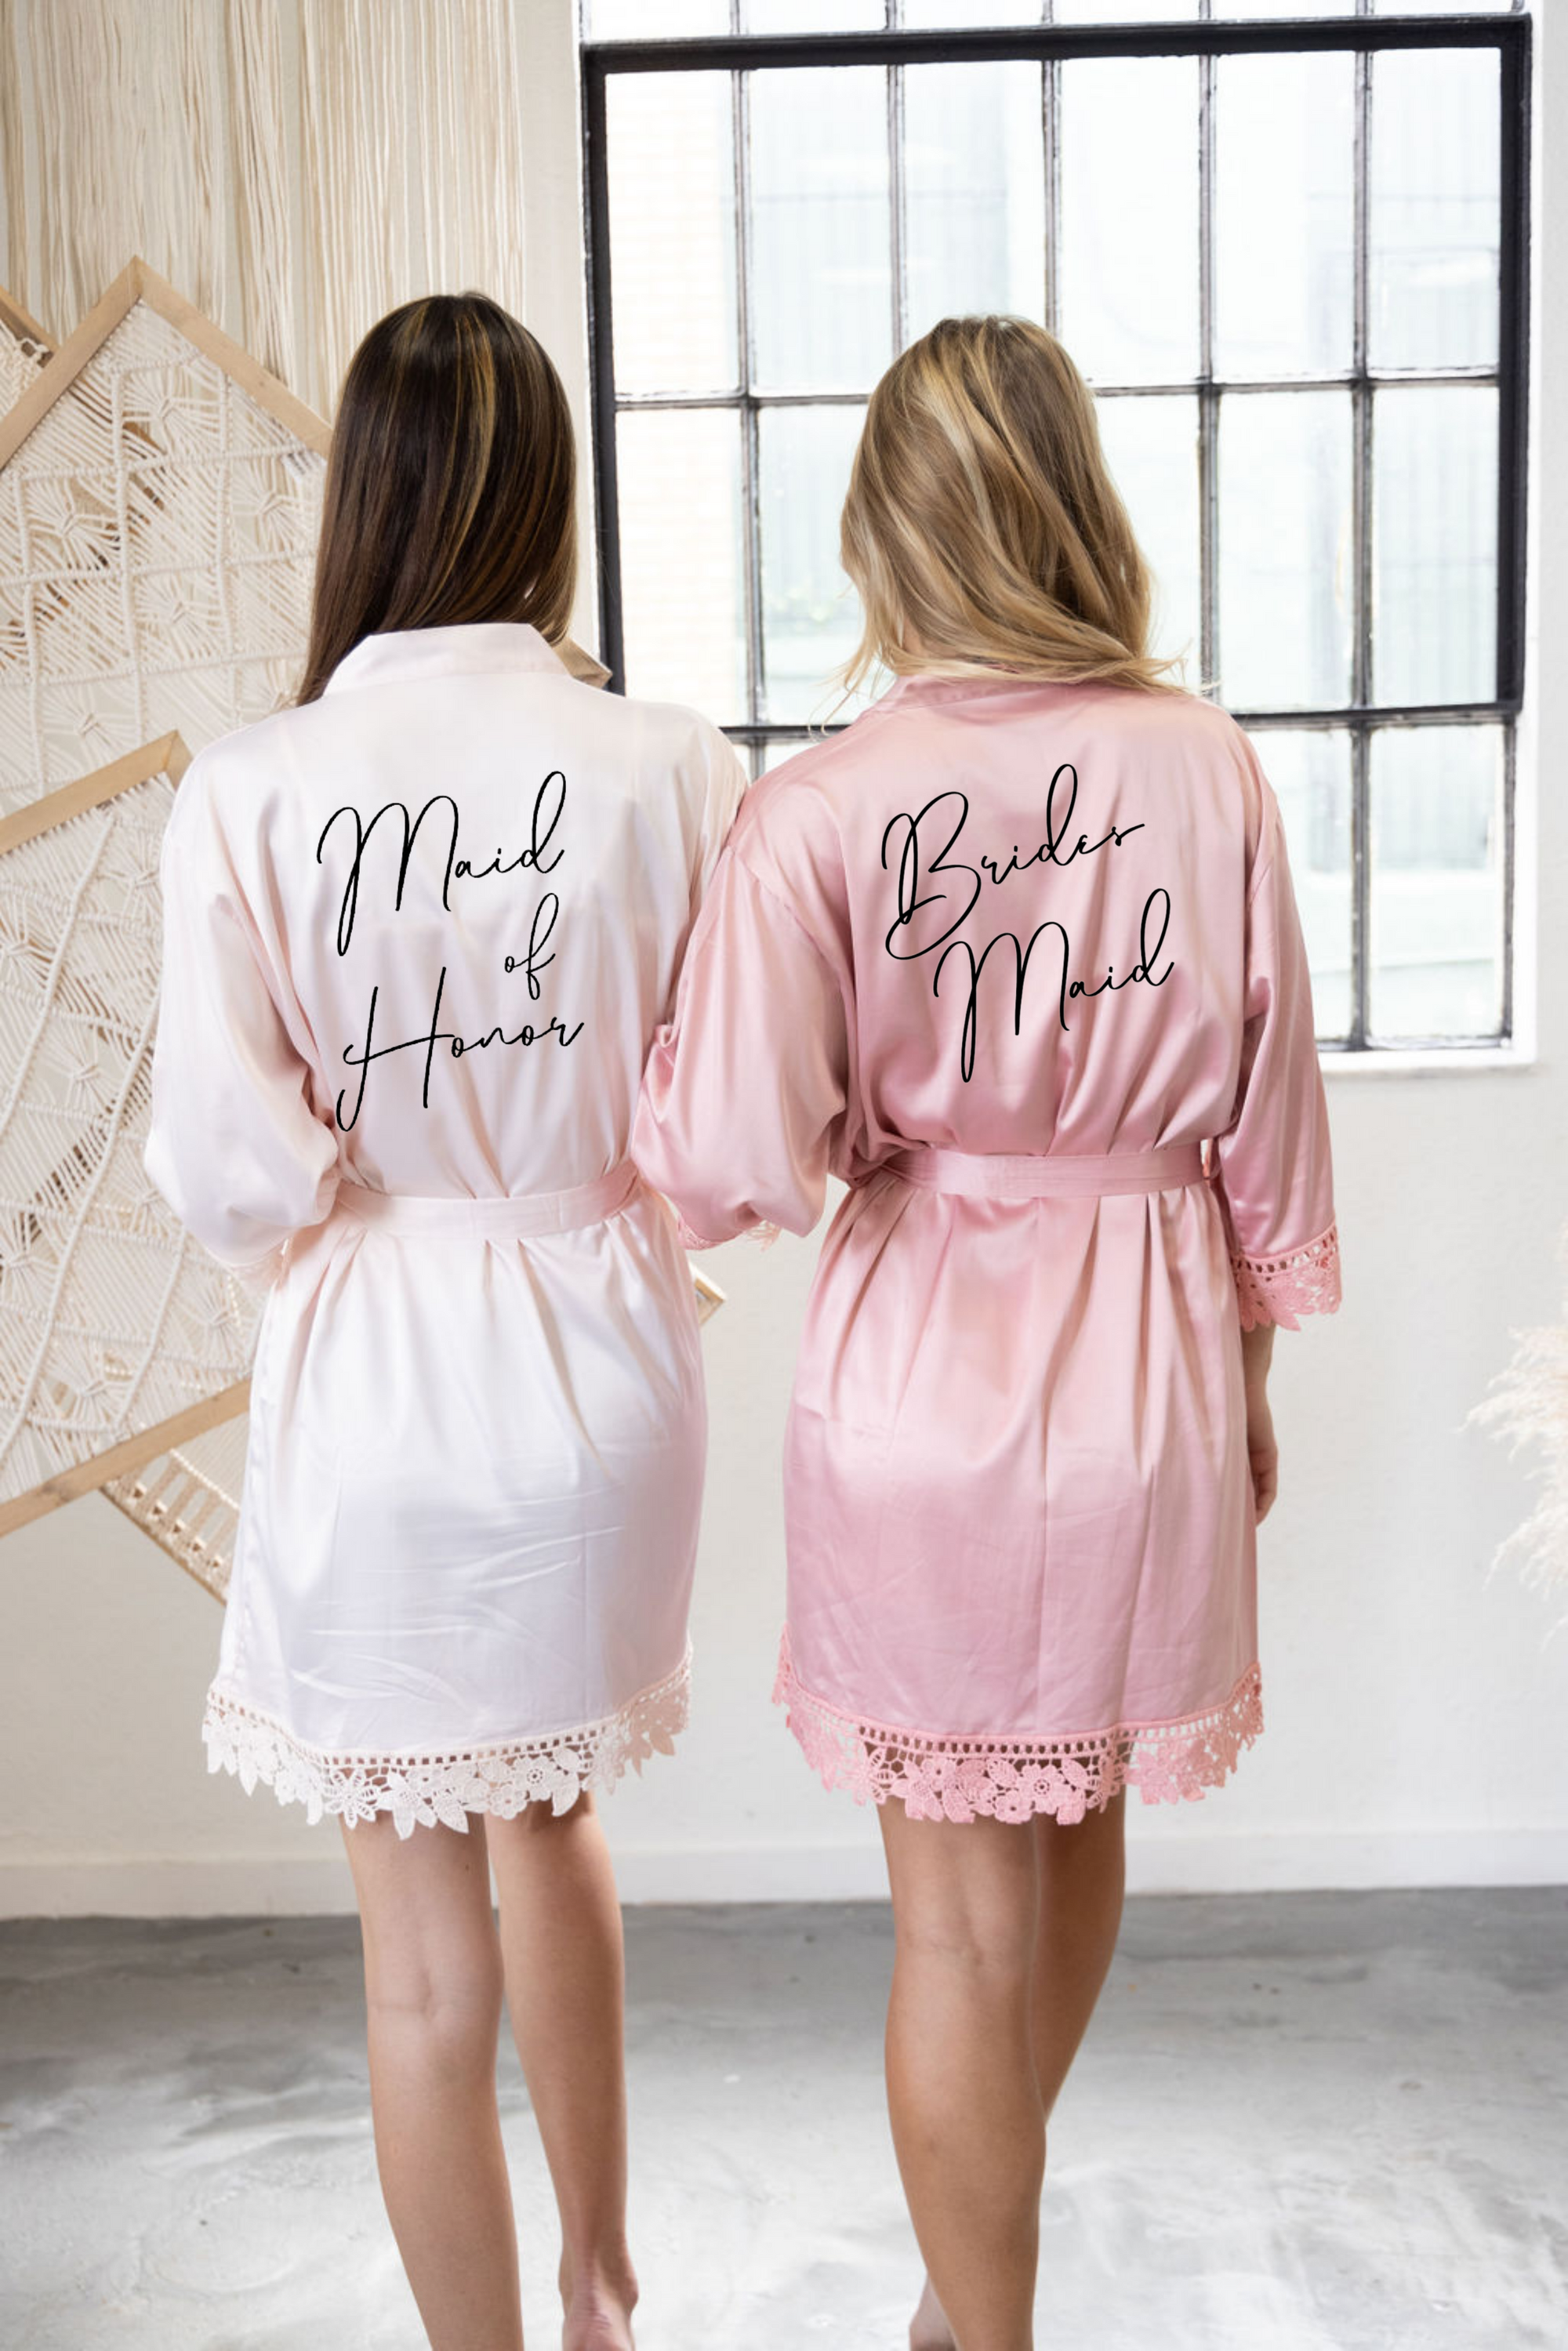 Bridal Party Lace Robes personalized